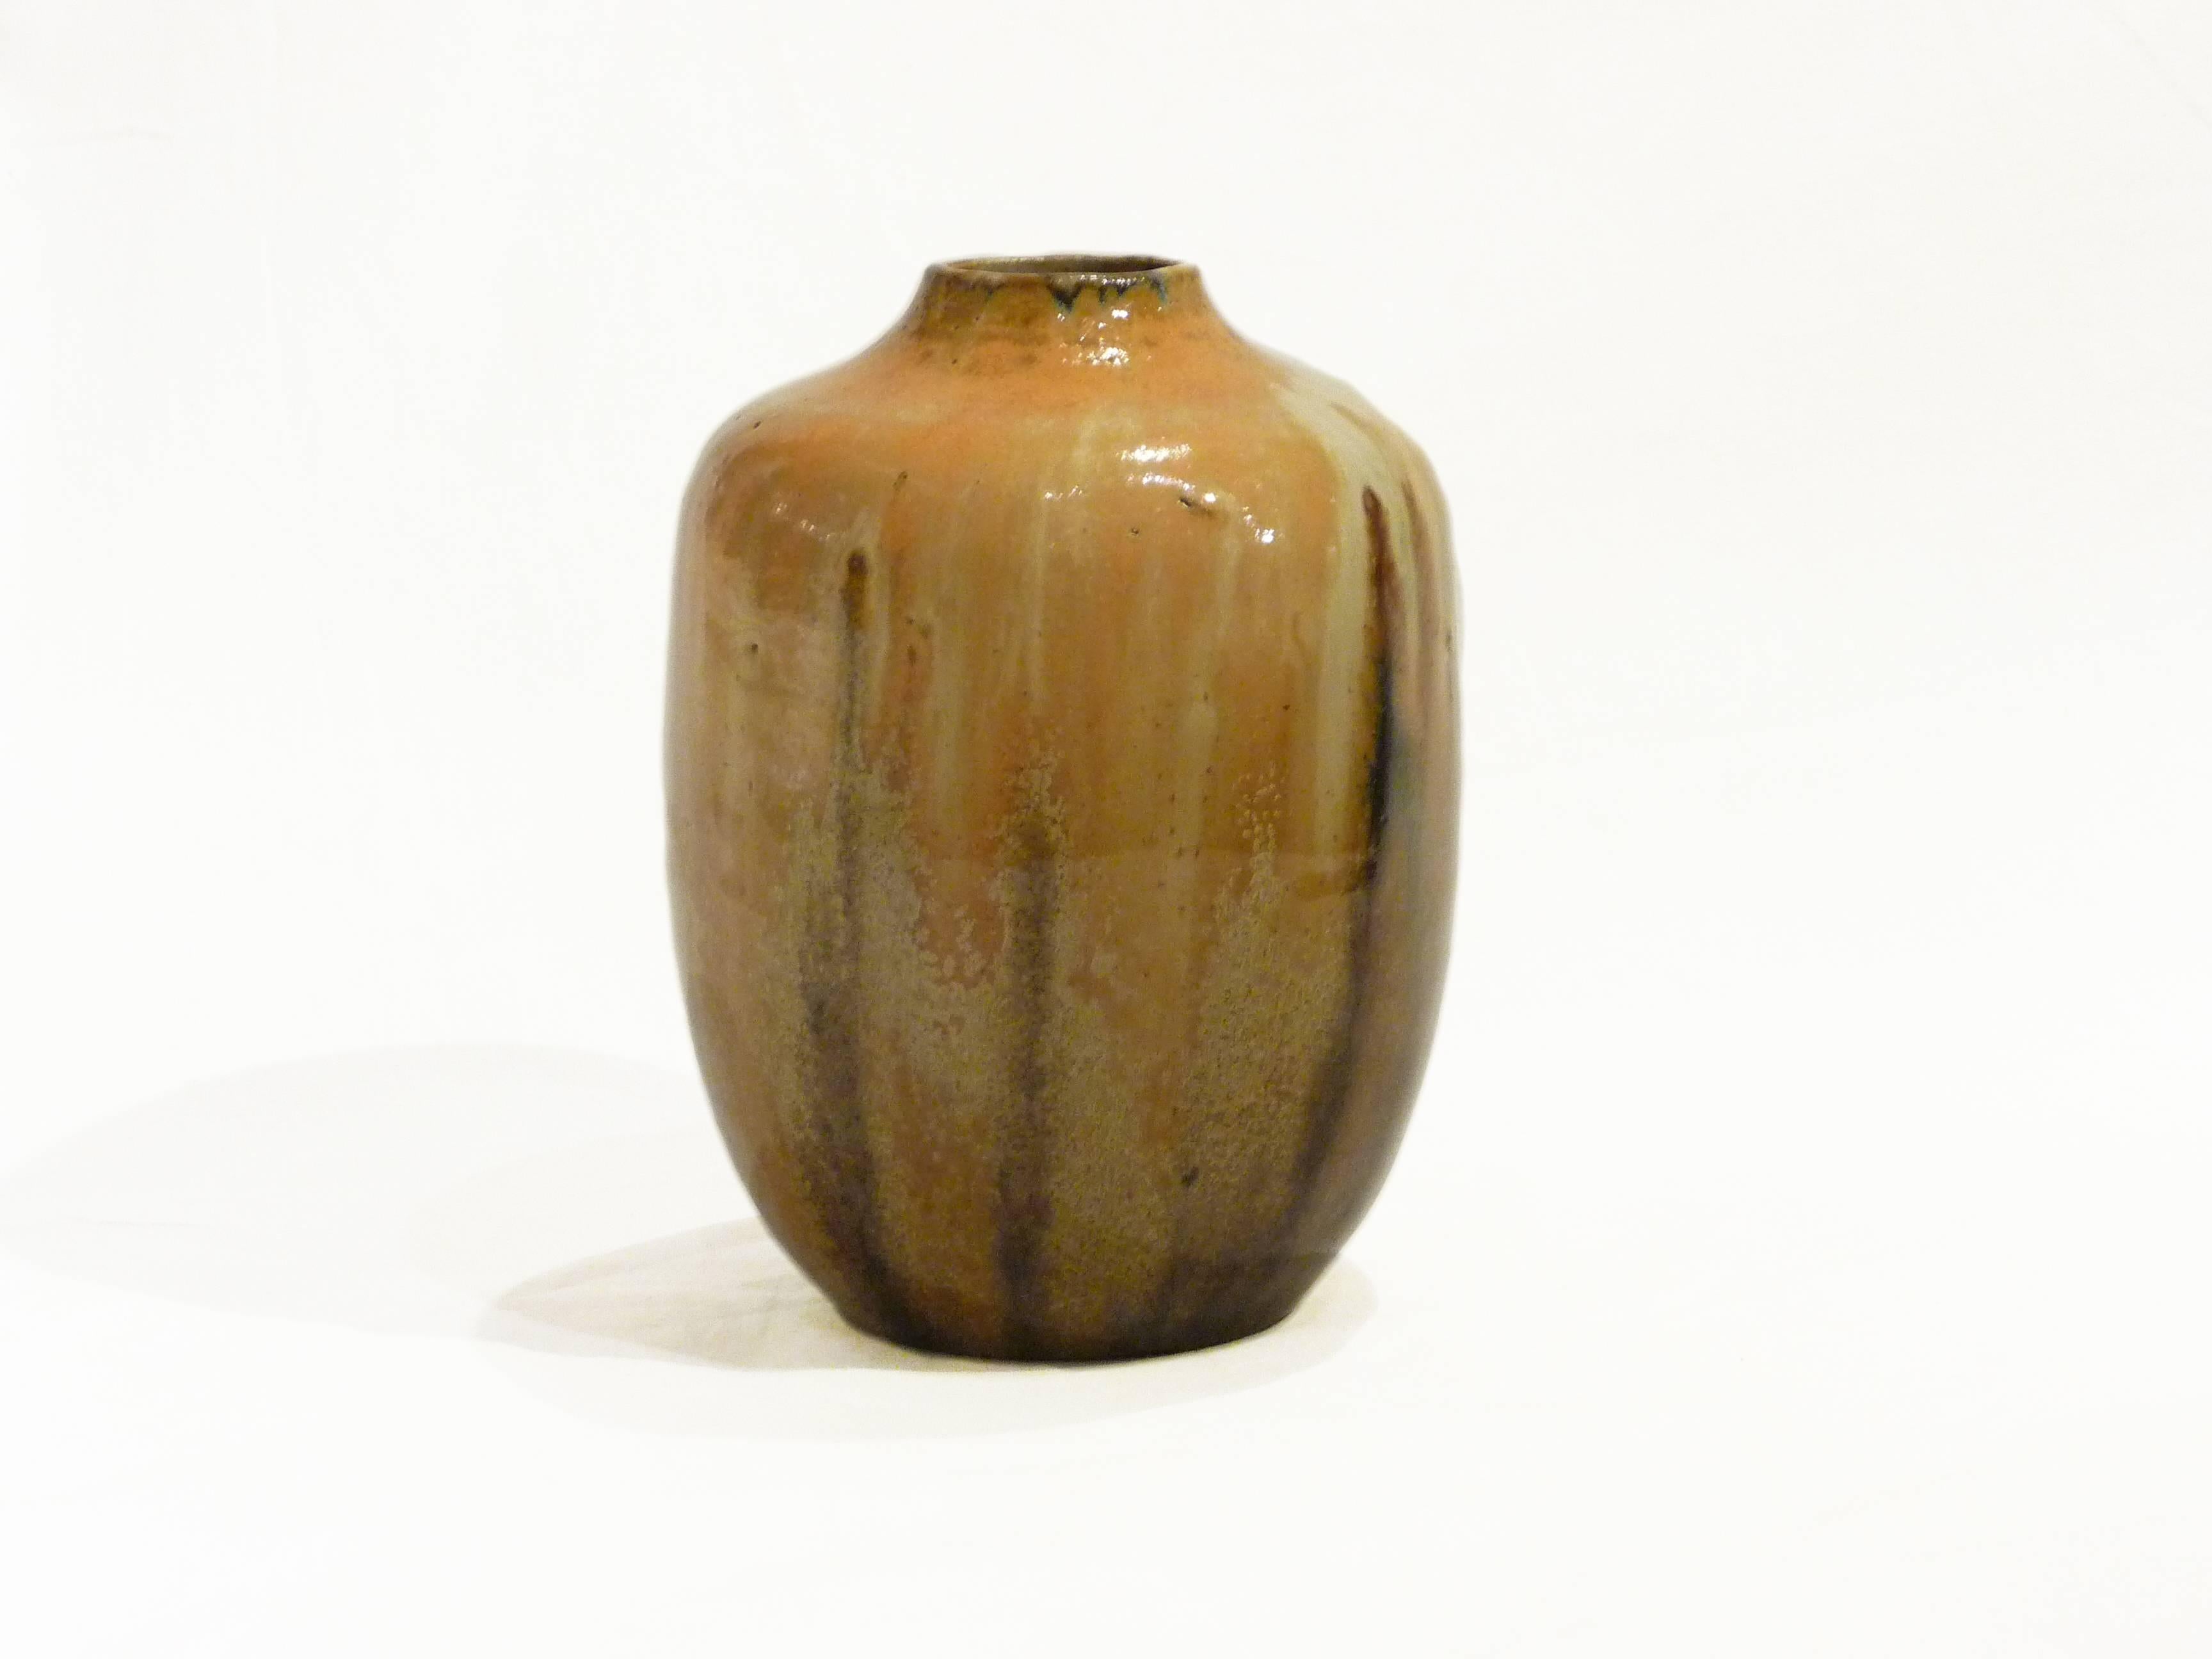 Auguste Delaherche
An Art Nouveau brown, yellow and beige baluster vase
Signed and dated 04/09/05
